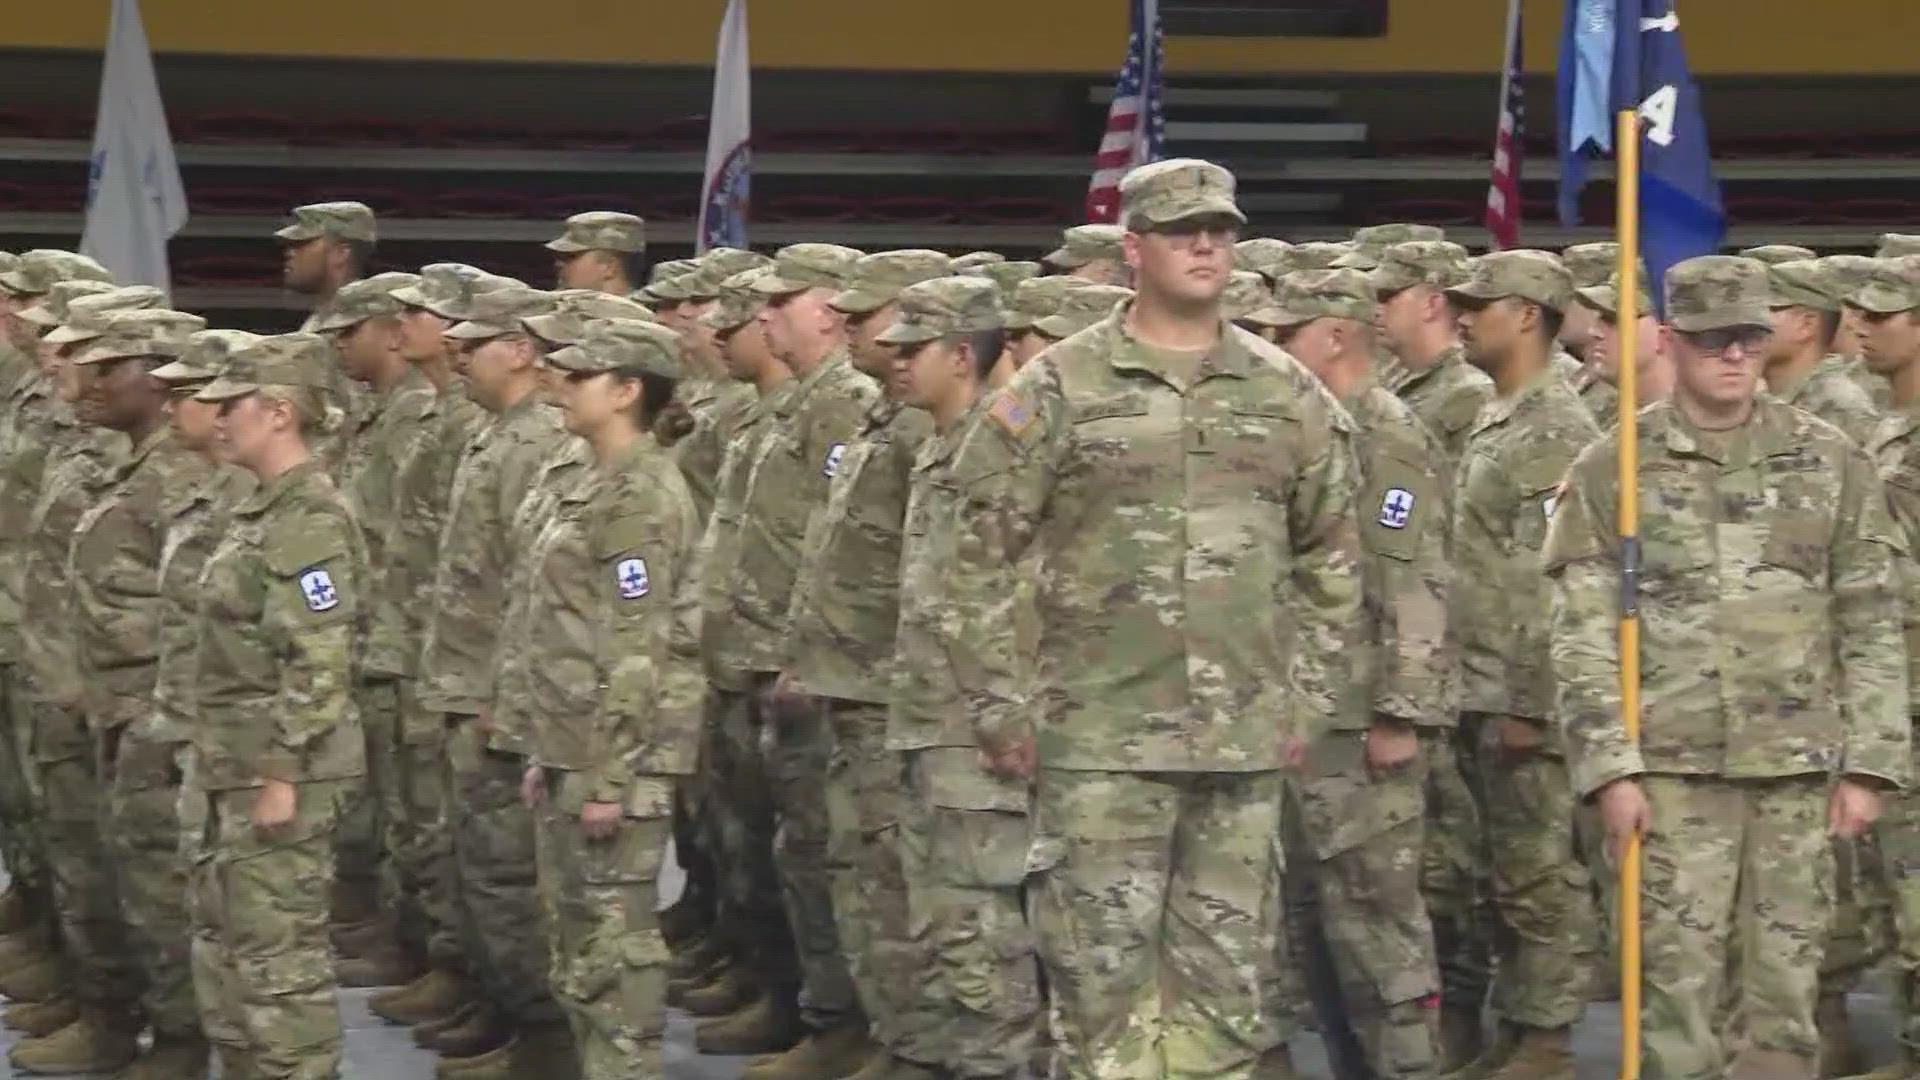 The soldiers were given a deployment send-off ceremony in the Valley Friday night.